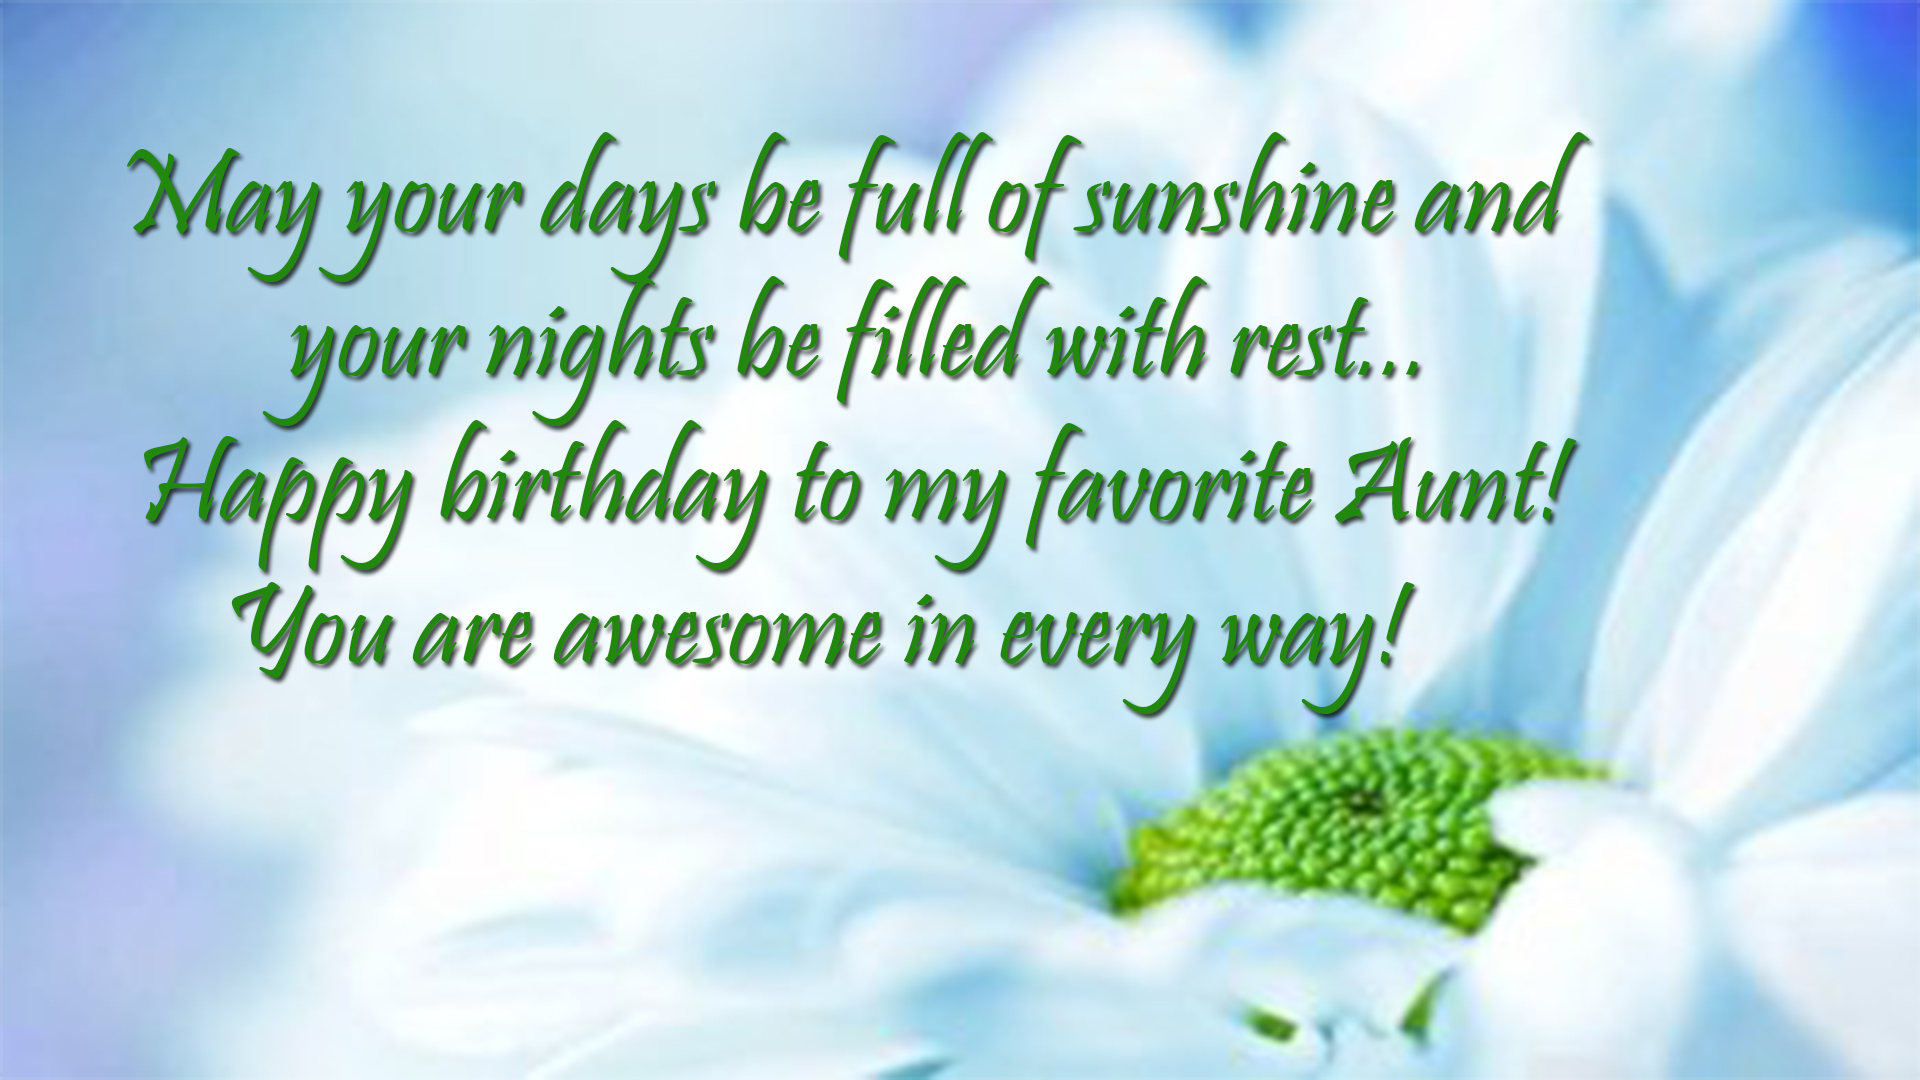 birthday greetings for aunt image